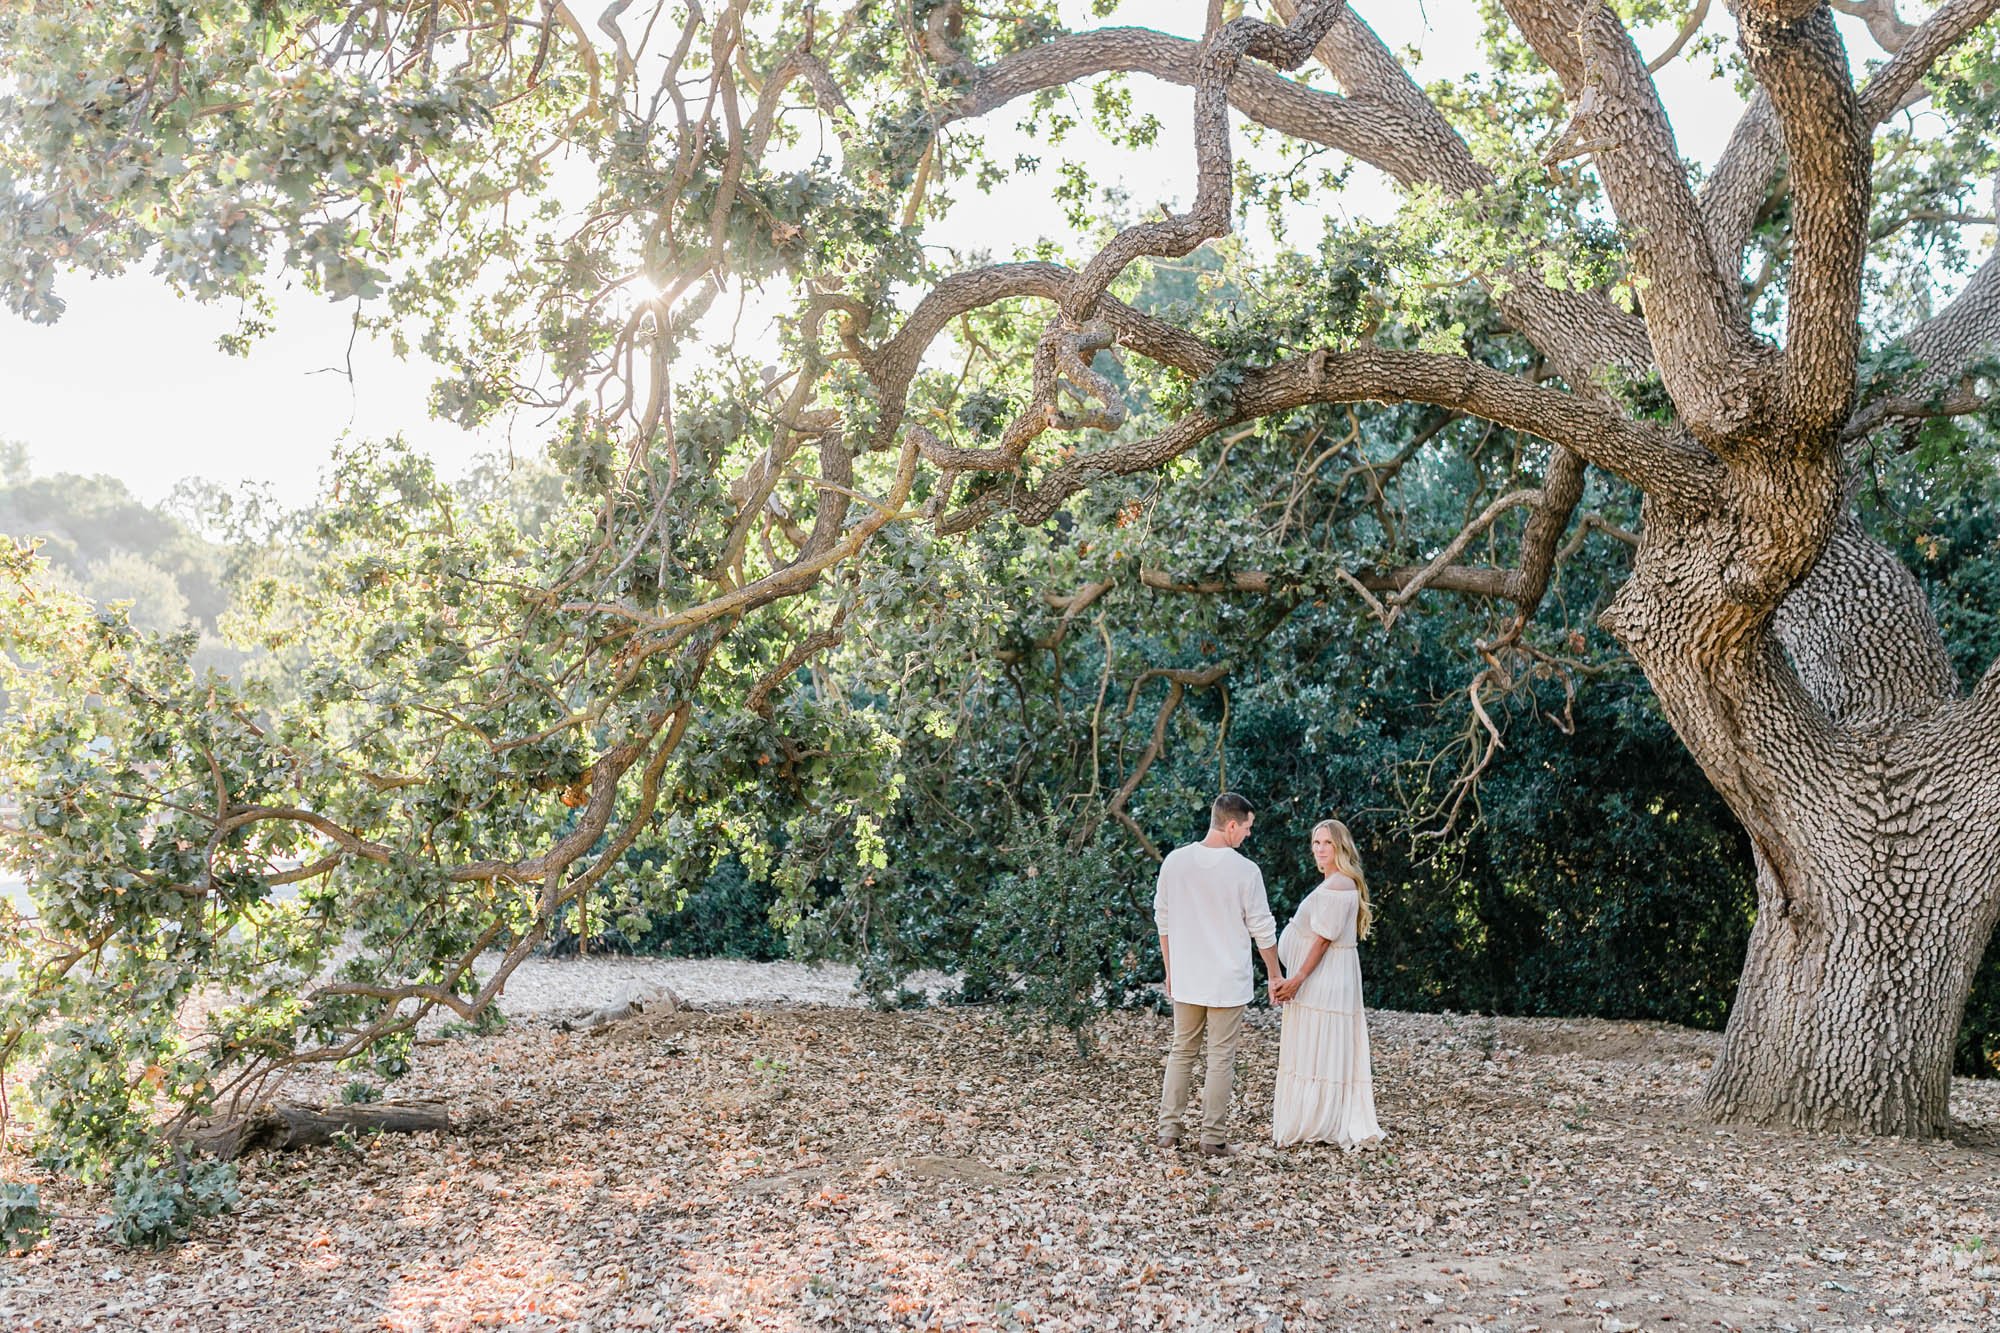 Old Meadows Park Maternity session under oak trees with Ventura County photographer